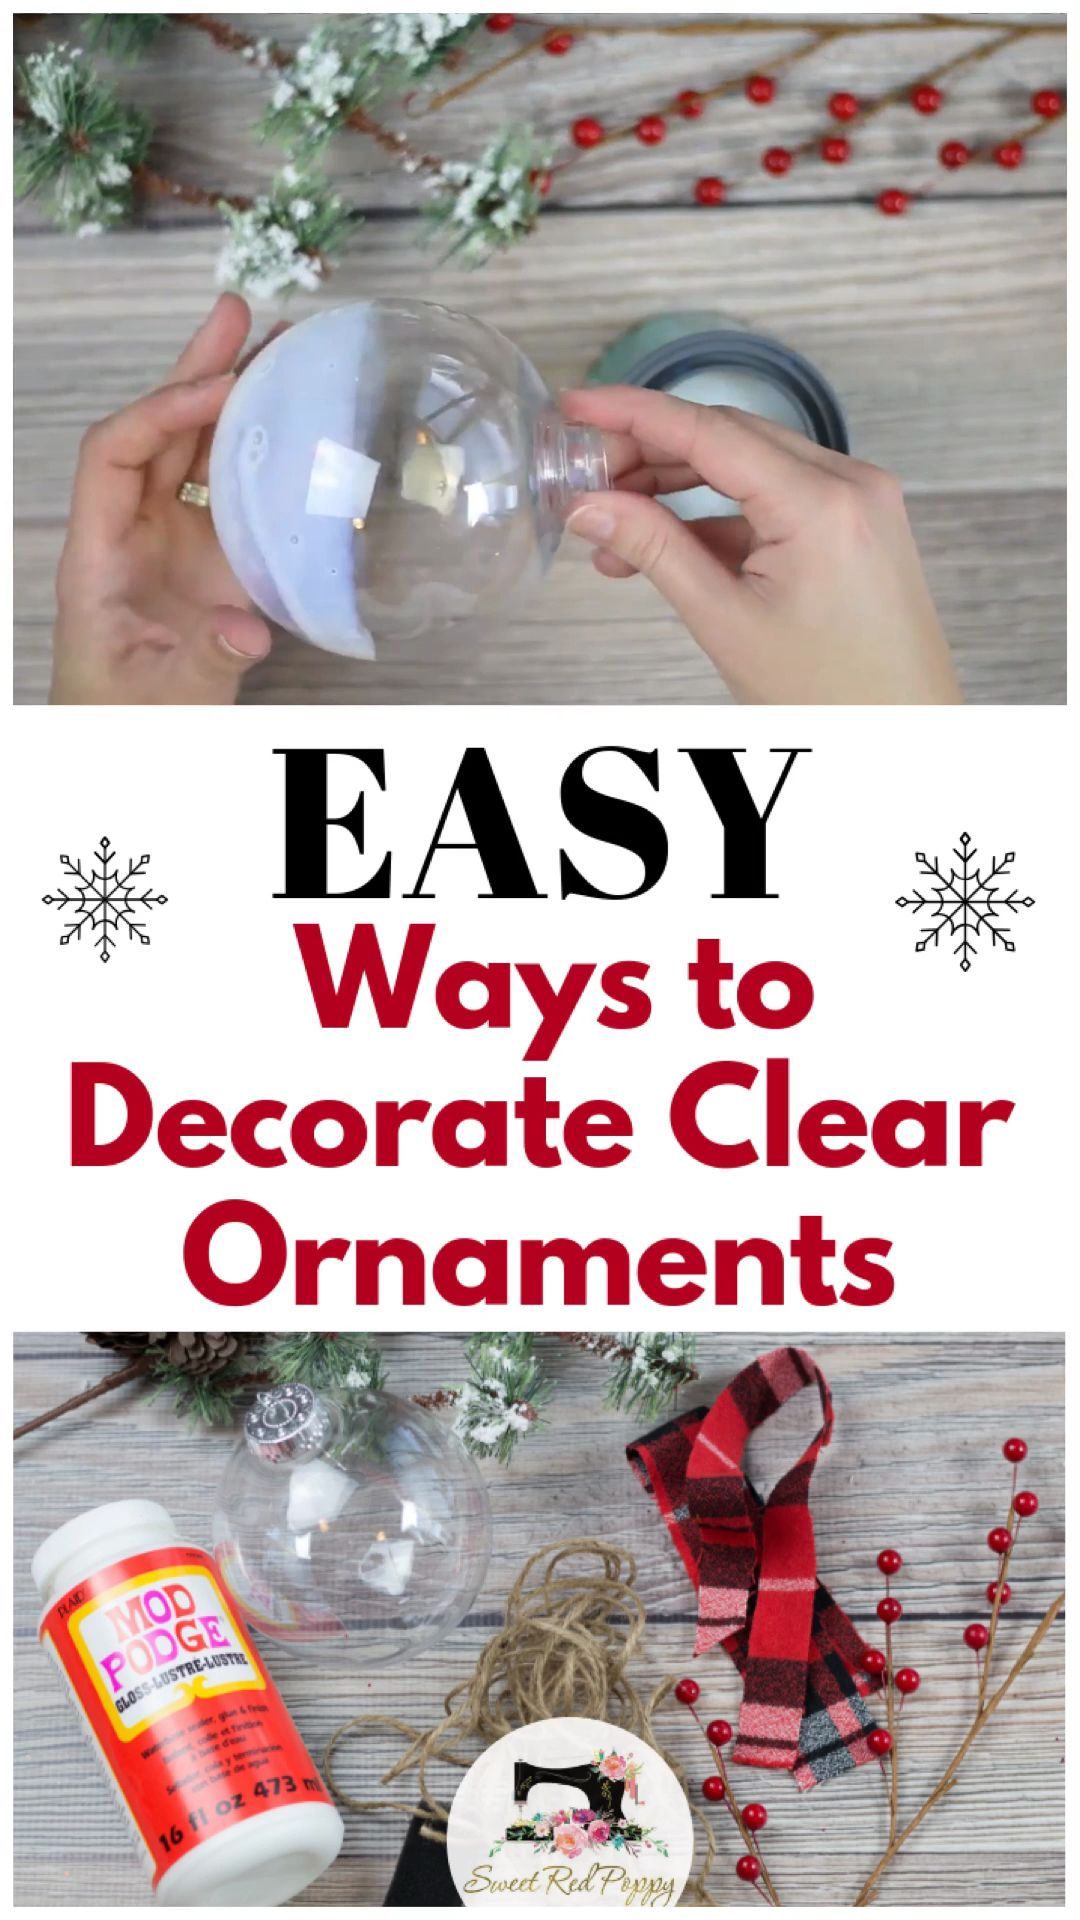 Easy Ways to Decorate Clear Plastic Ornaments for Christmas - Sweet Red Poppy - Easy Ways to Decorate Clear Plastic Ornaments for Christmas - Sweet Red Poppy -   diy Christmas mason jars